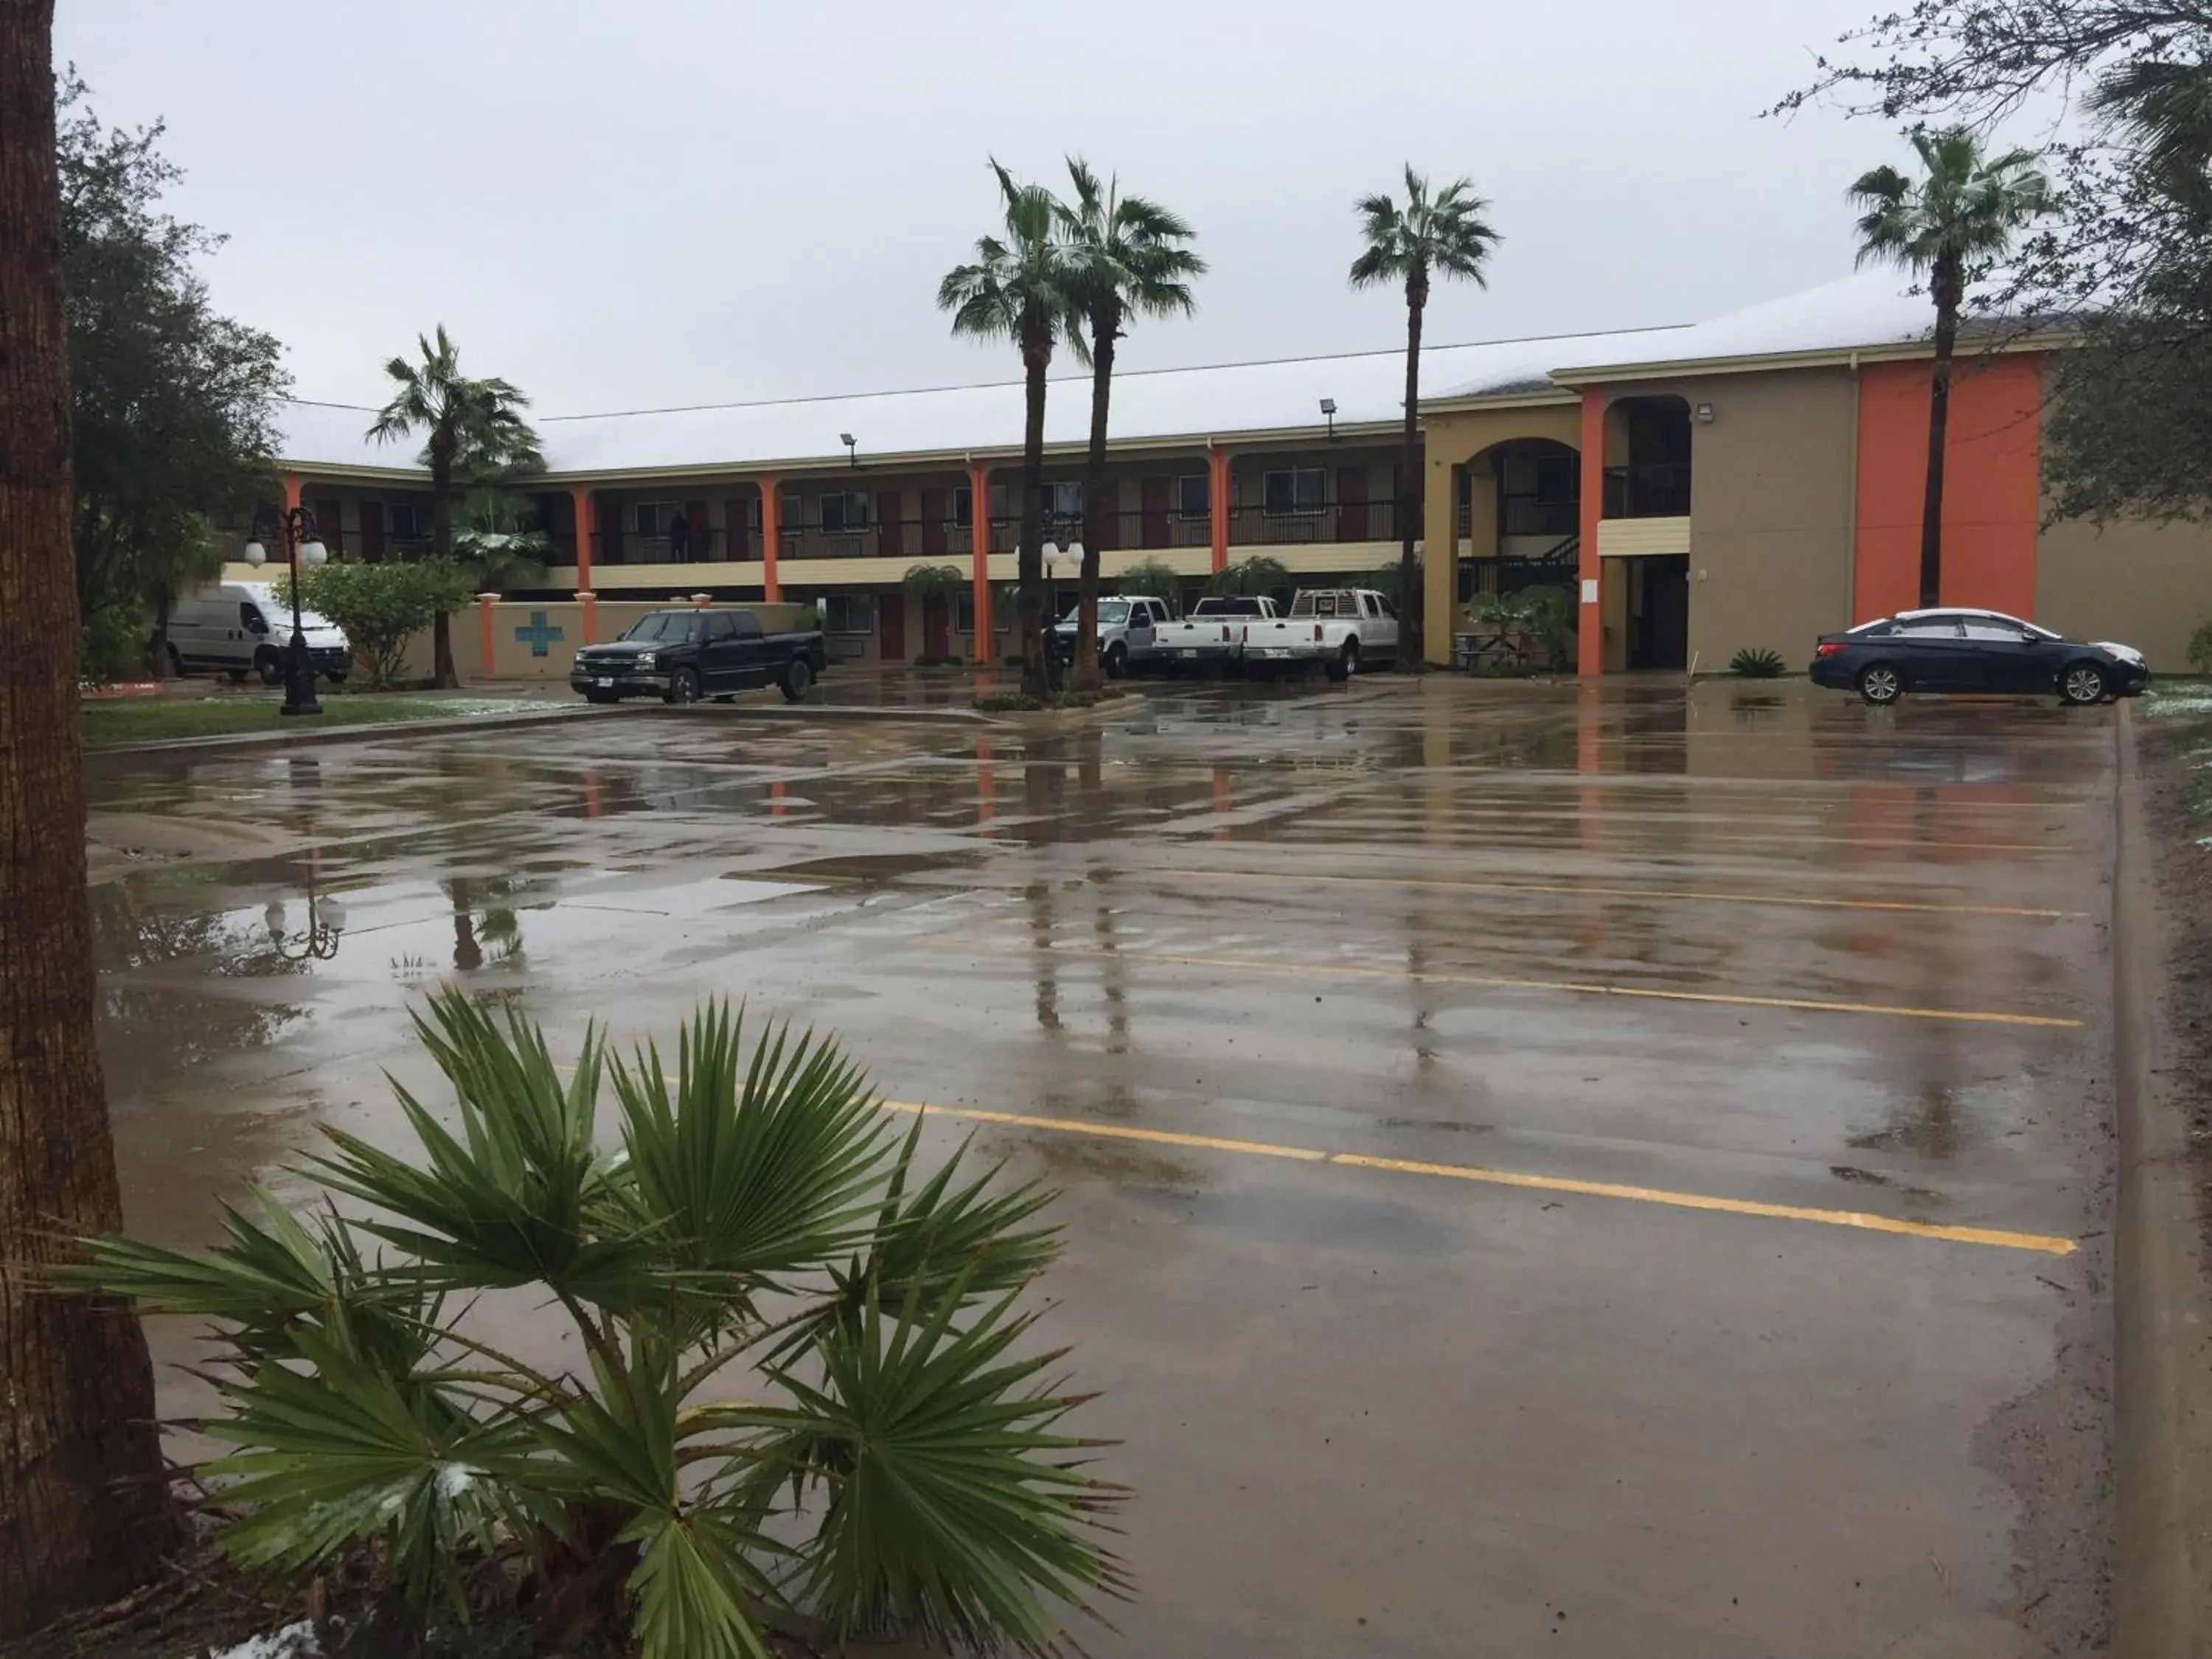 Parking, Property Building in Texas Inn and Suites City Center at University Dr.